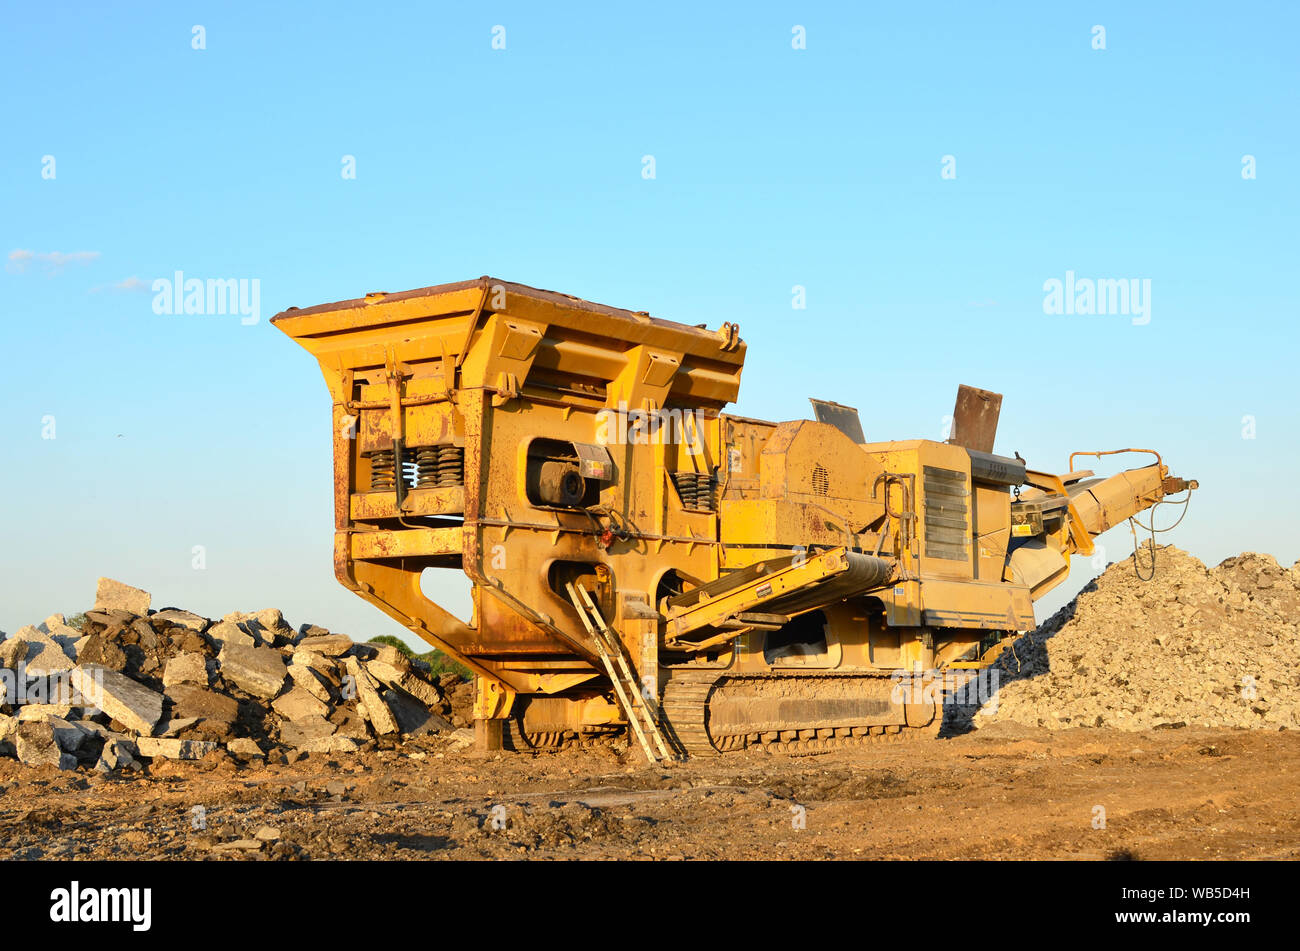 https://c8.alamy.com/comp/WB5D4H/mobile-stone-crusher-machine-by-the-construction-site-or-mining-quarry-for-crushing-old-concrete-slabs-into-gravel-and-subsequent-cement-production-WB5D4H.jpg